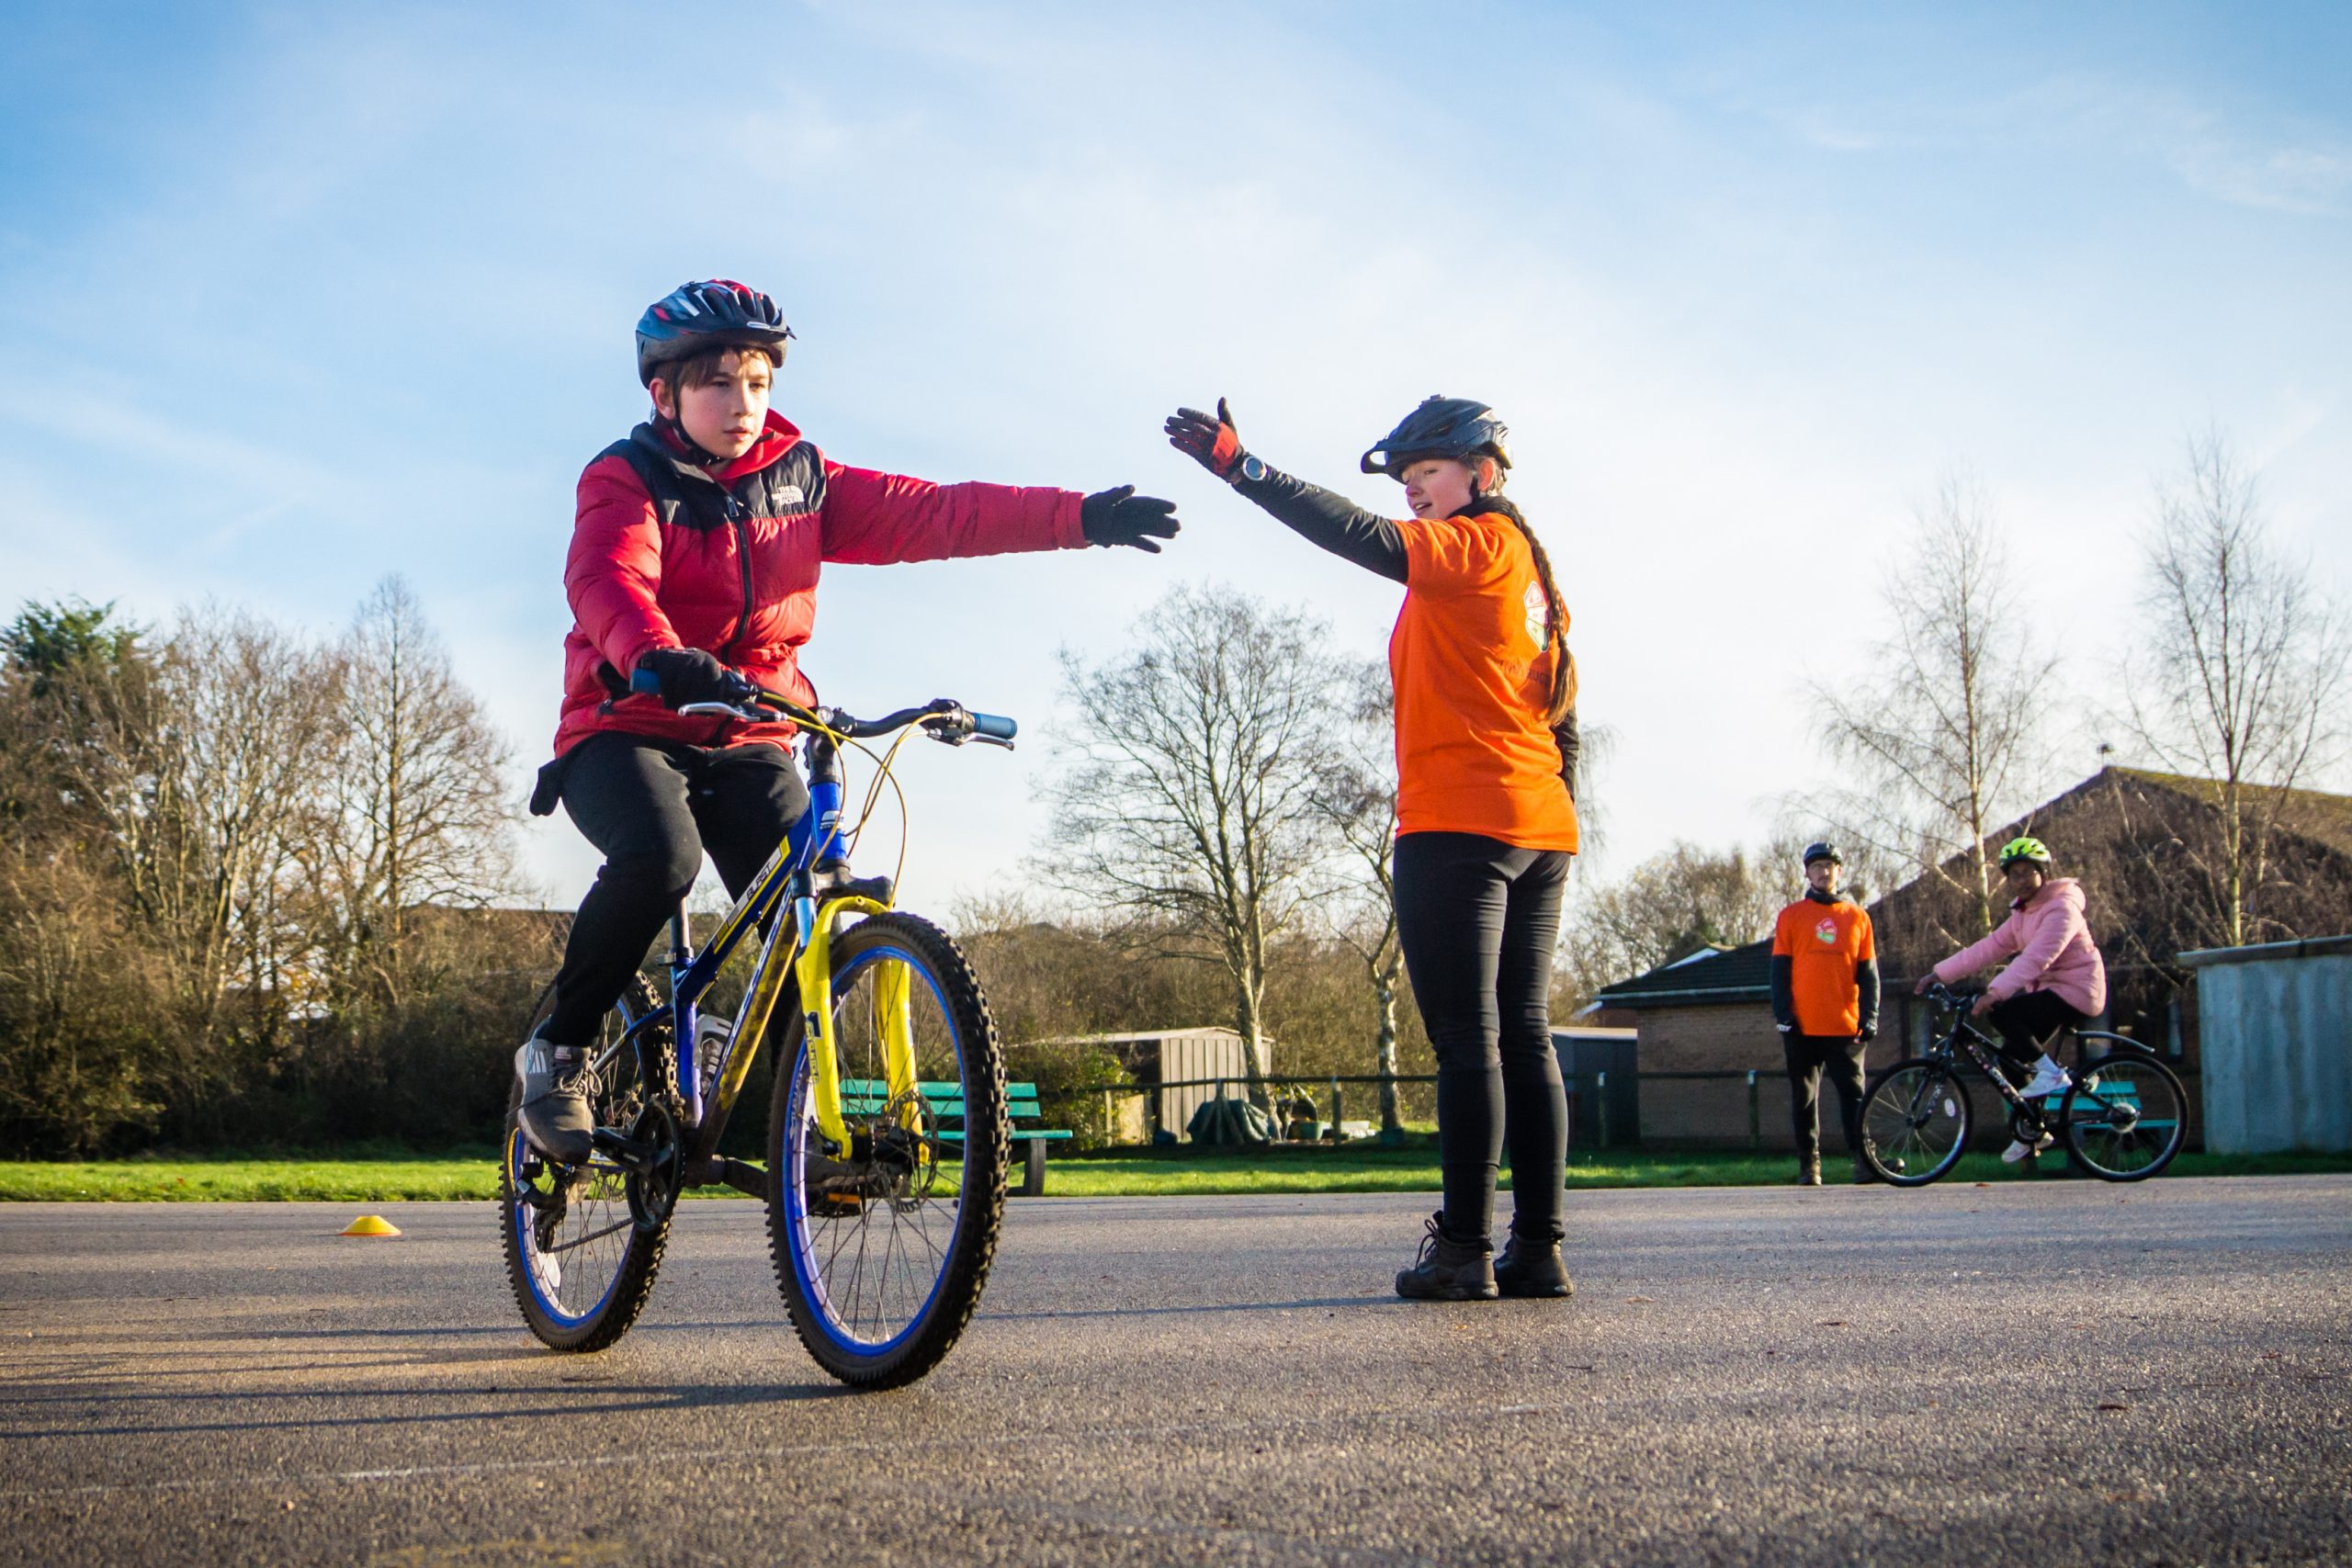 A boy on a bike reaches out to signal with his left arm. A female instructor reaches out her arm to show him what to do.